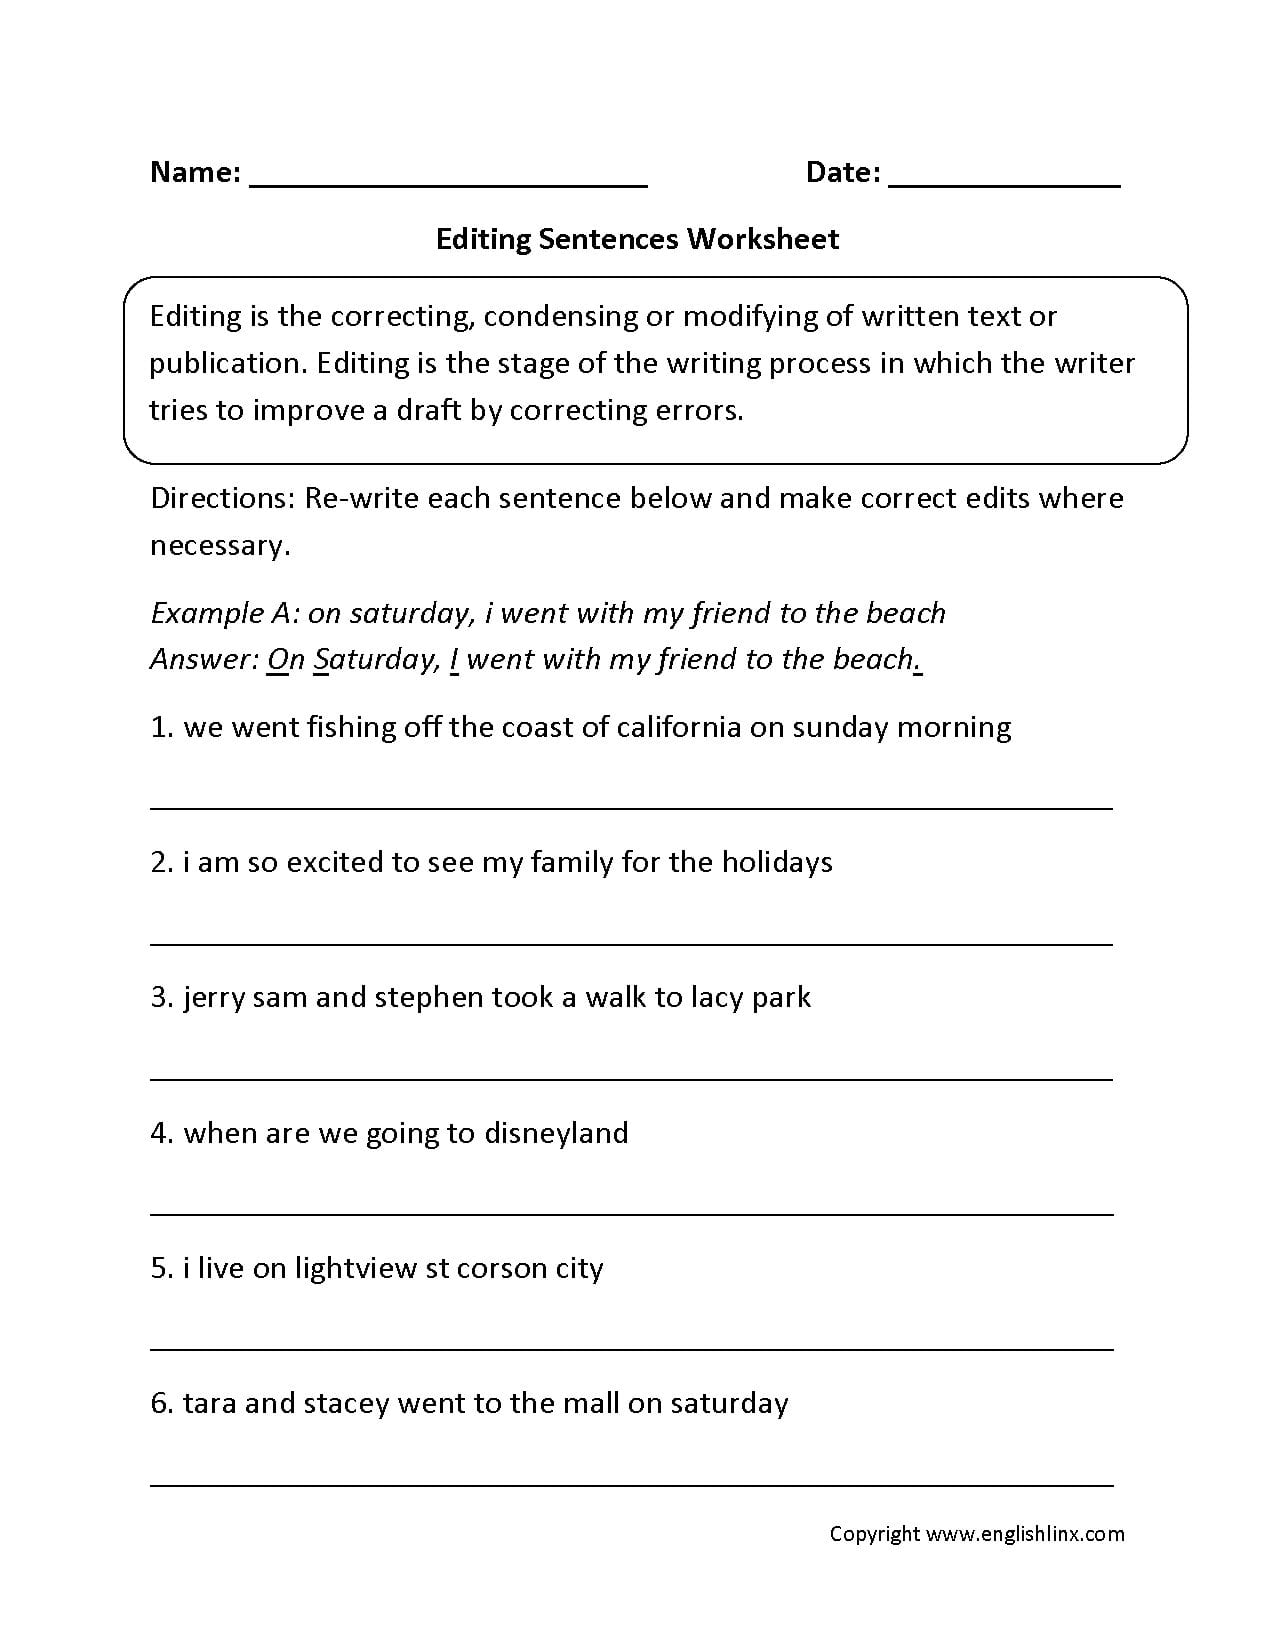 Writing Worksheets  Editing Worksheets Together With Proofreading Worksheets Pdf